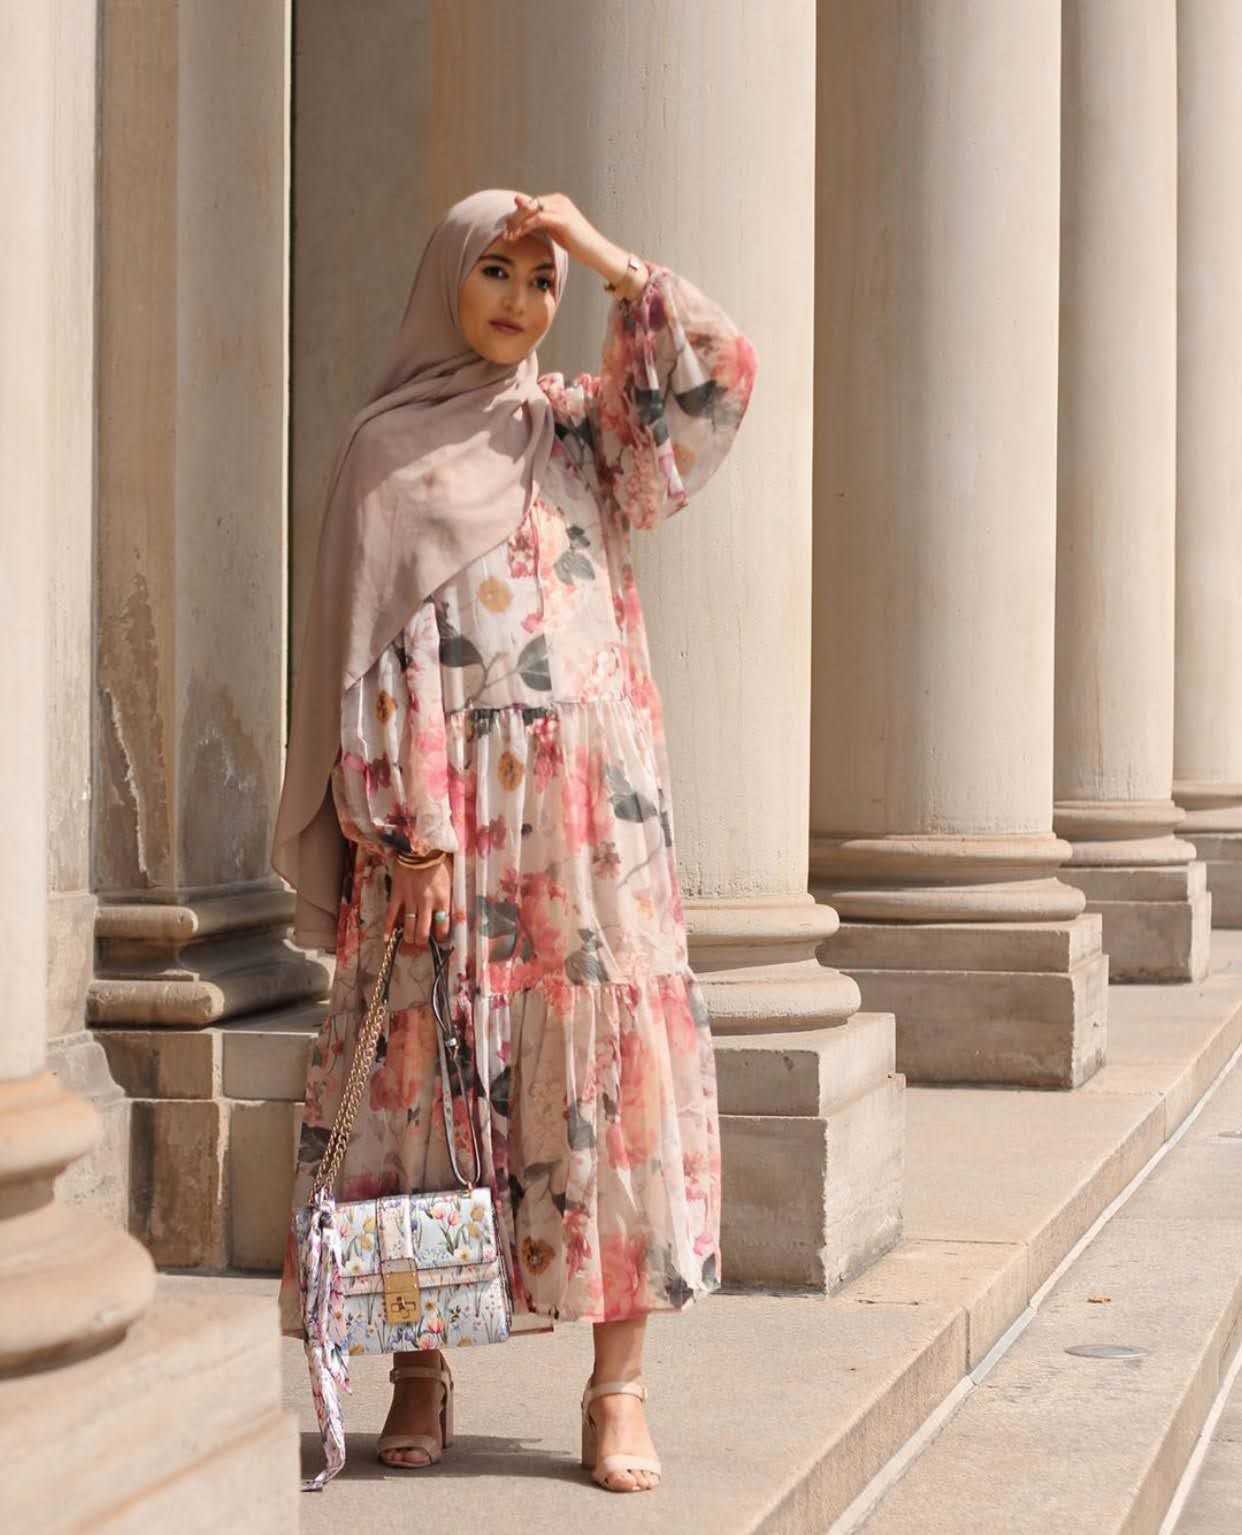 Modest Fashion Long Dresses That Will Make You Look Effortlessly Classy -   9 style Hijab kebaya ideas